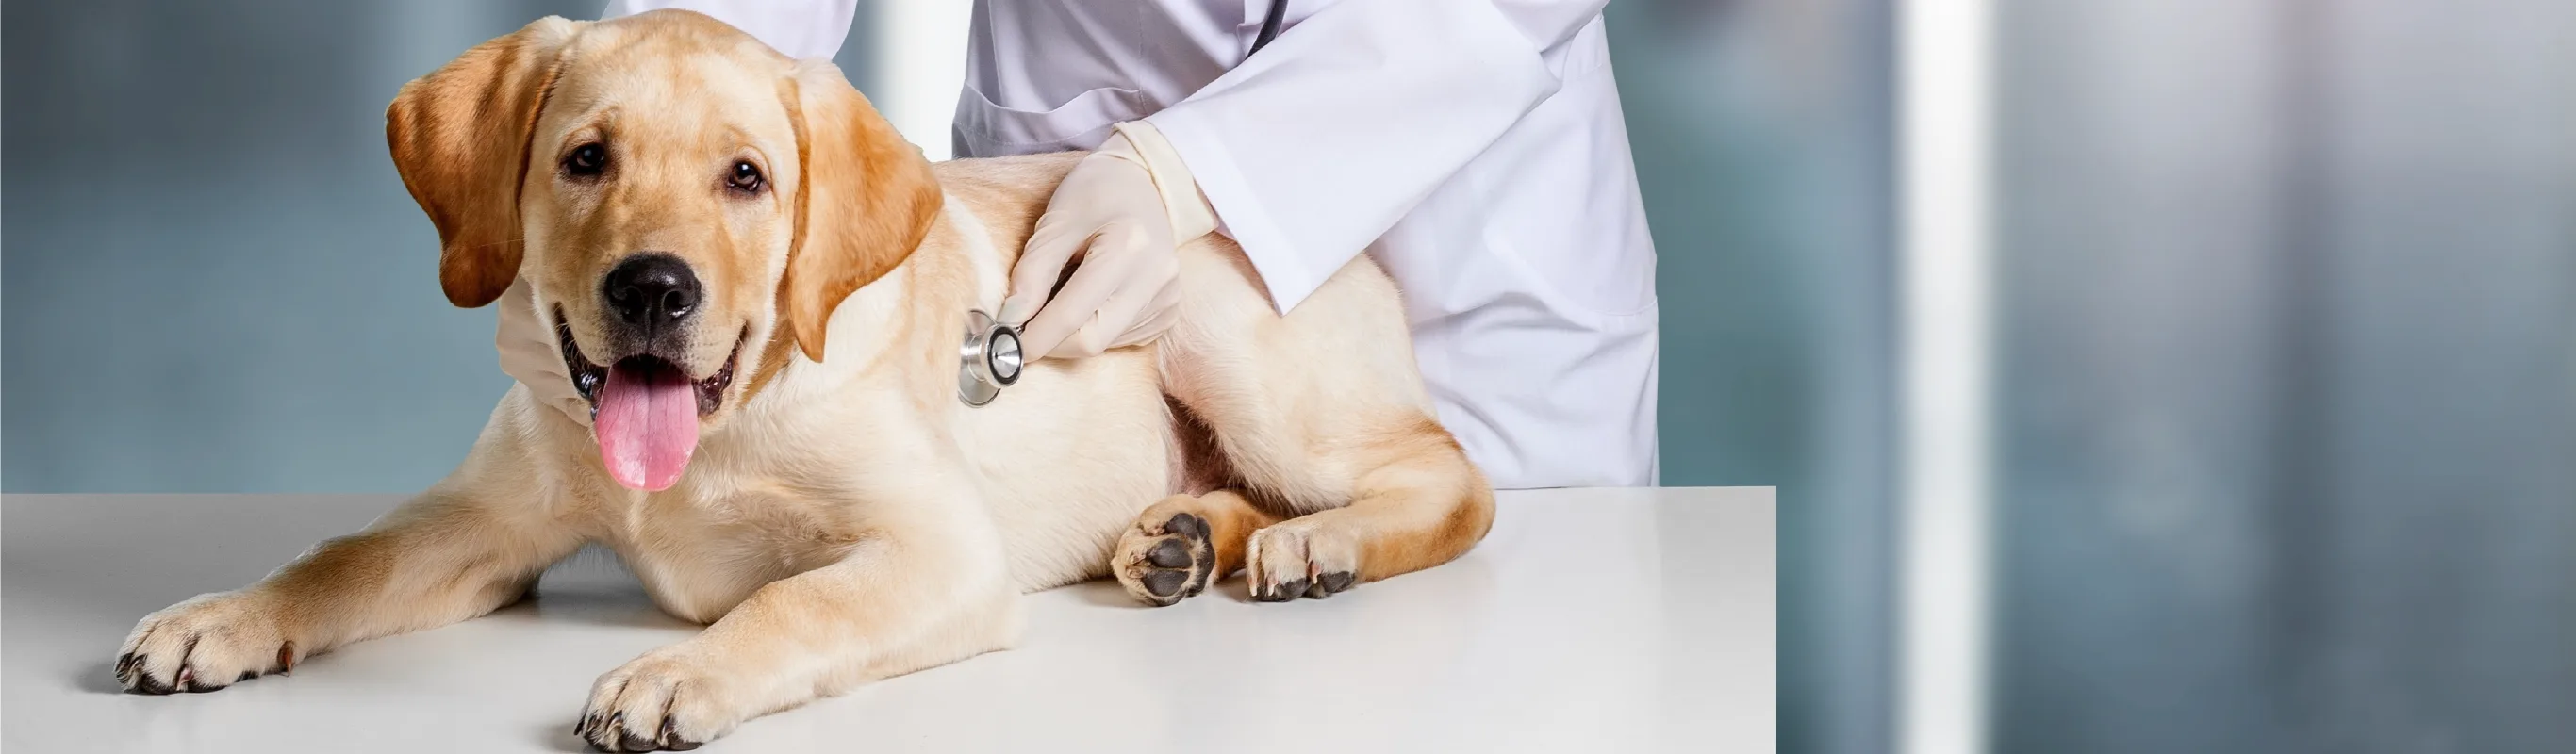 Dog sitting on a table with a staff member holding a stethescope